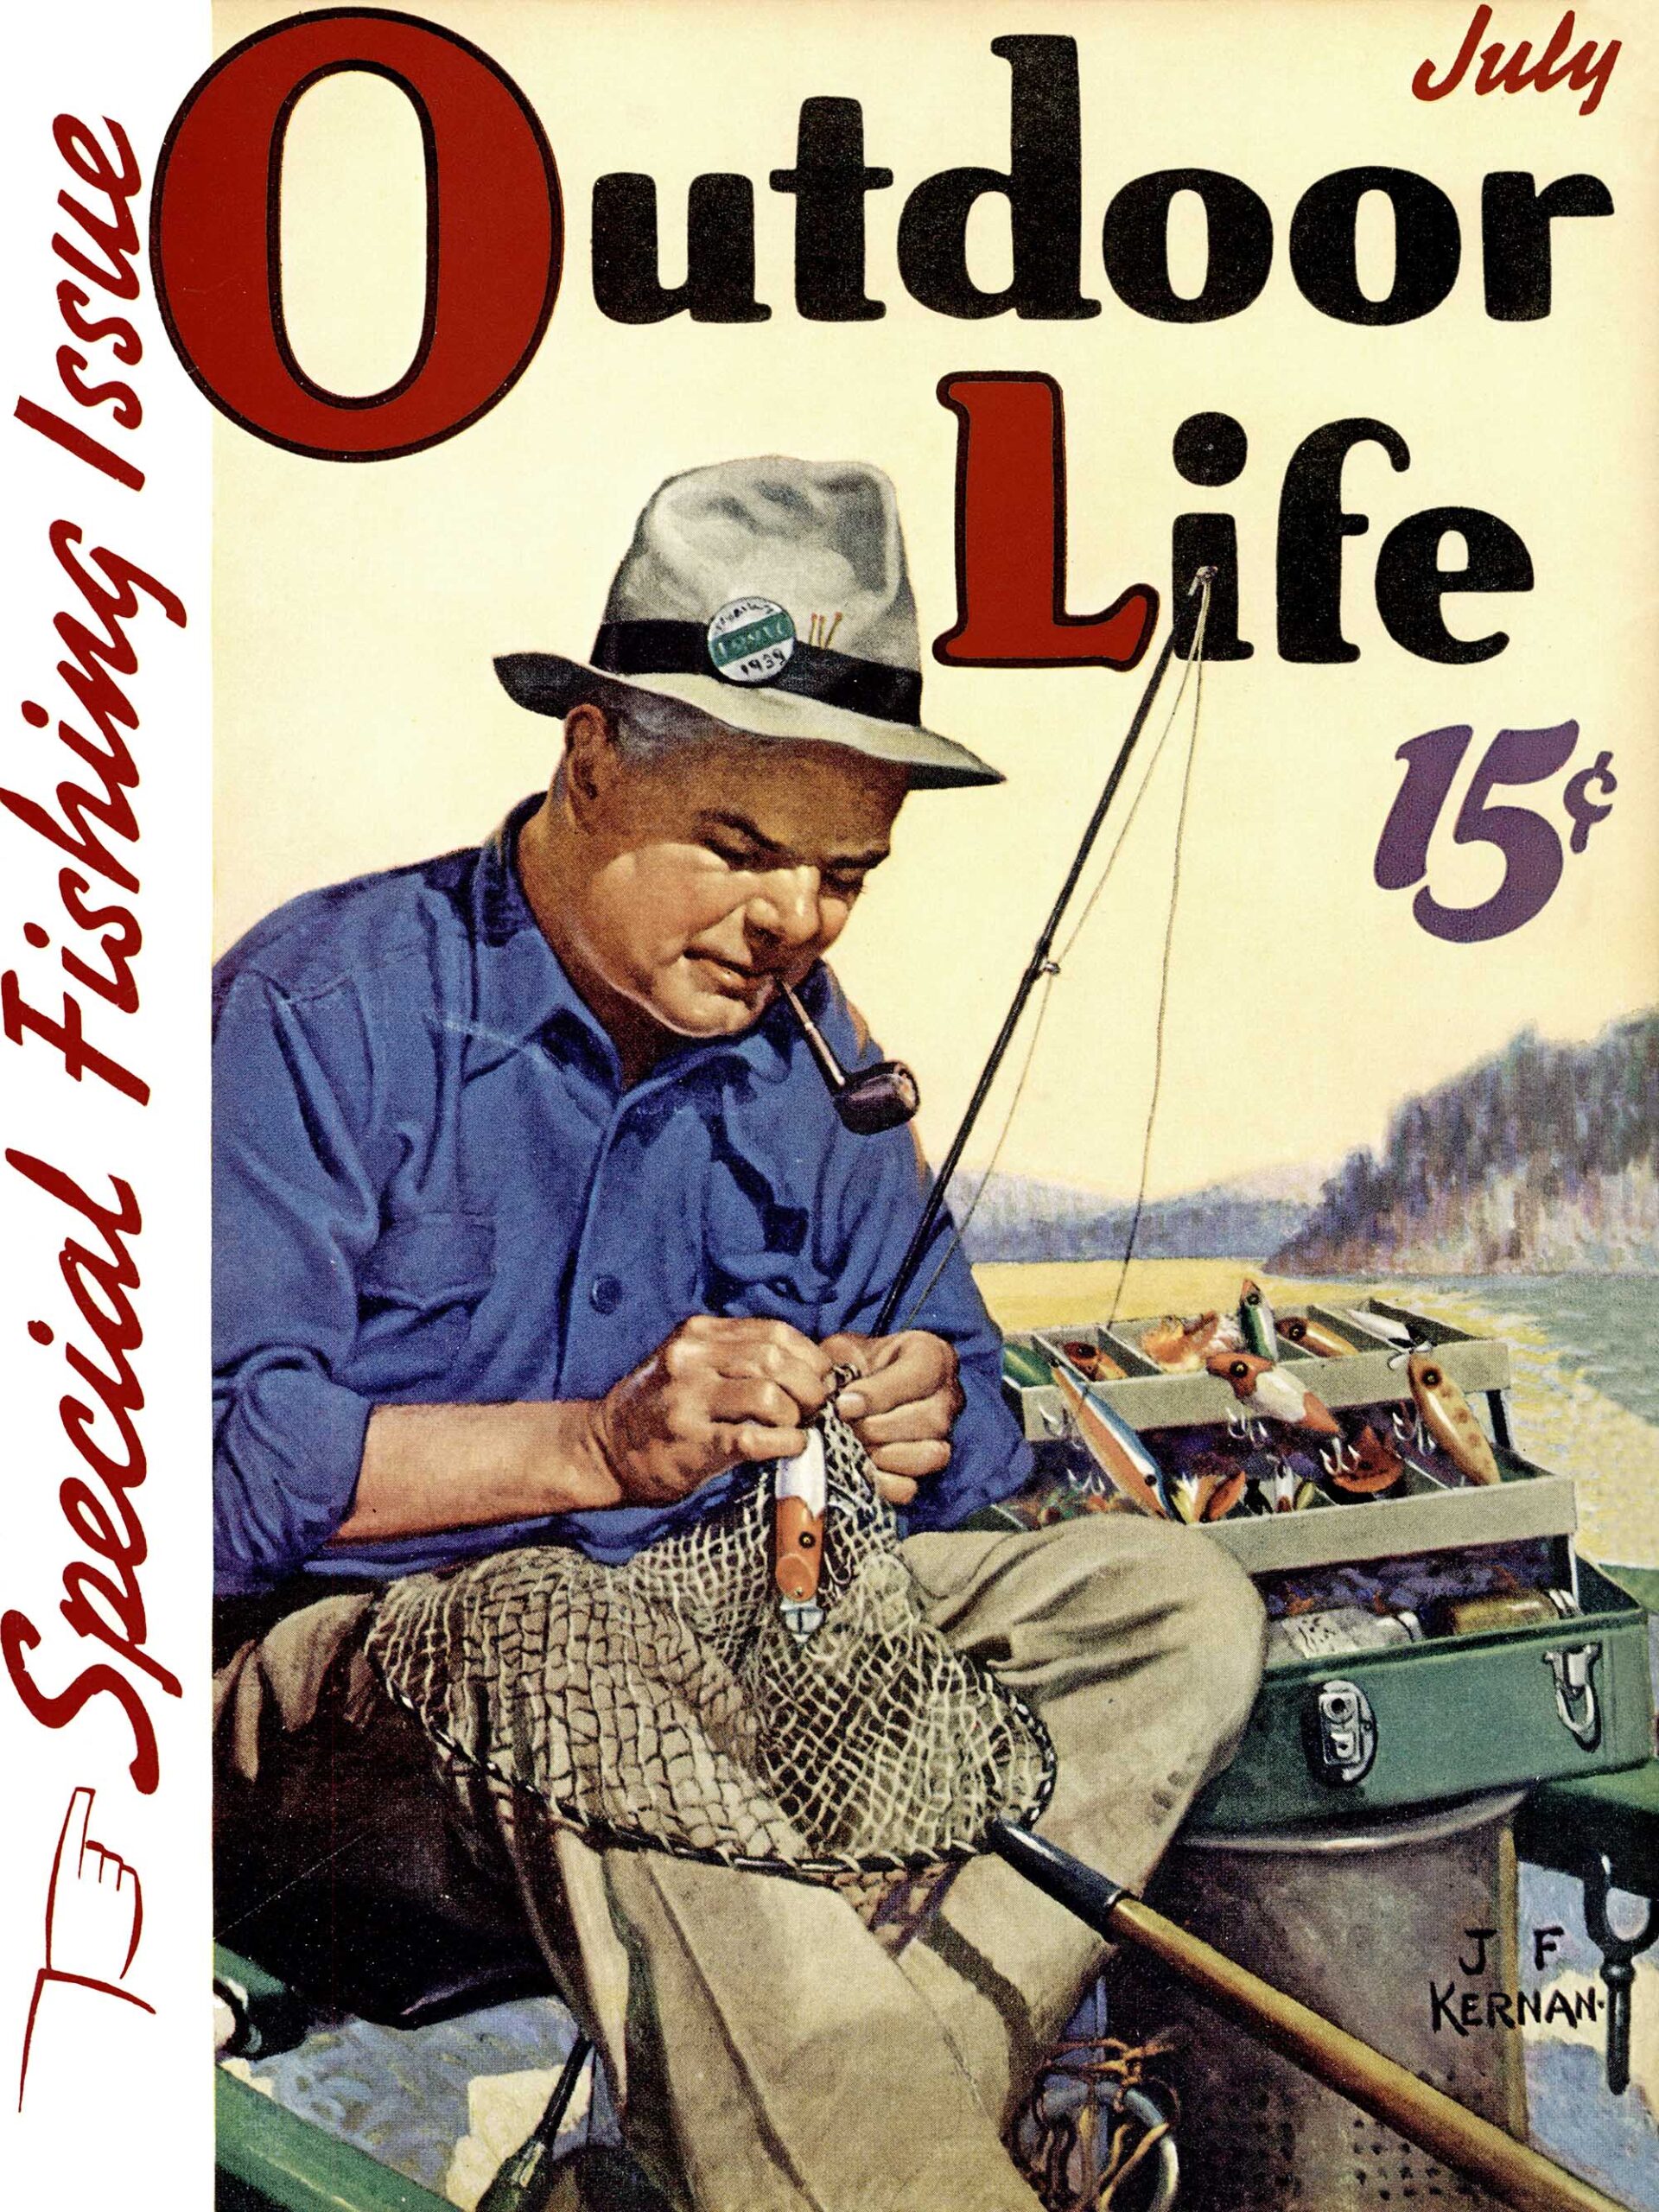 The July 1939 cover of Outdoor Life, featuring a man with a fishing rod detangling a lure from a net.